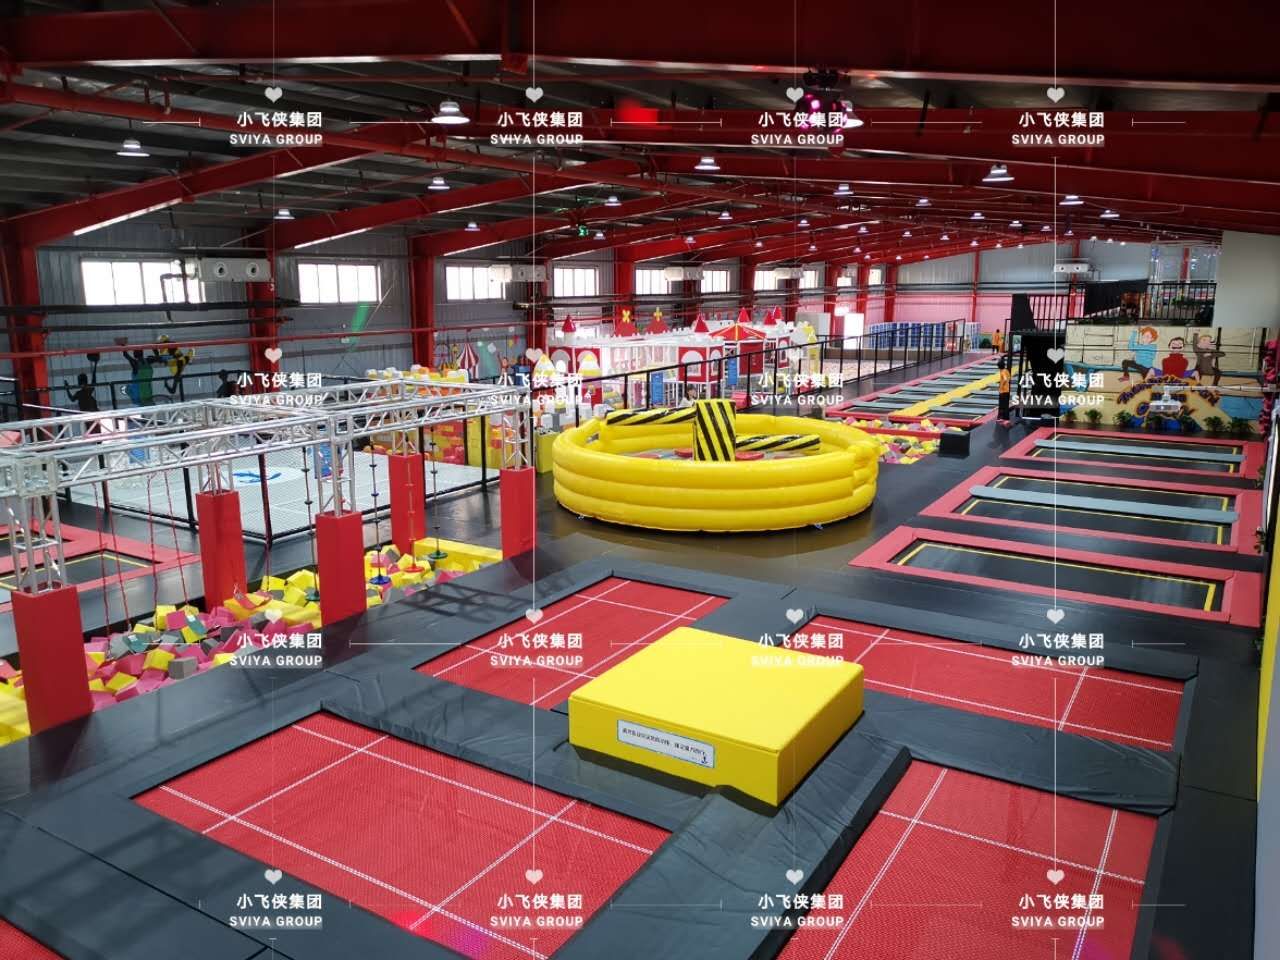 Trampoline park is a good business opportunity of Lebanon